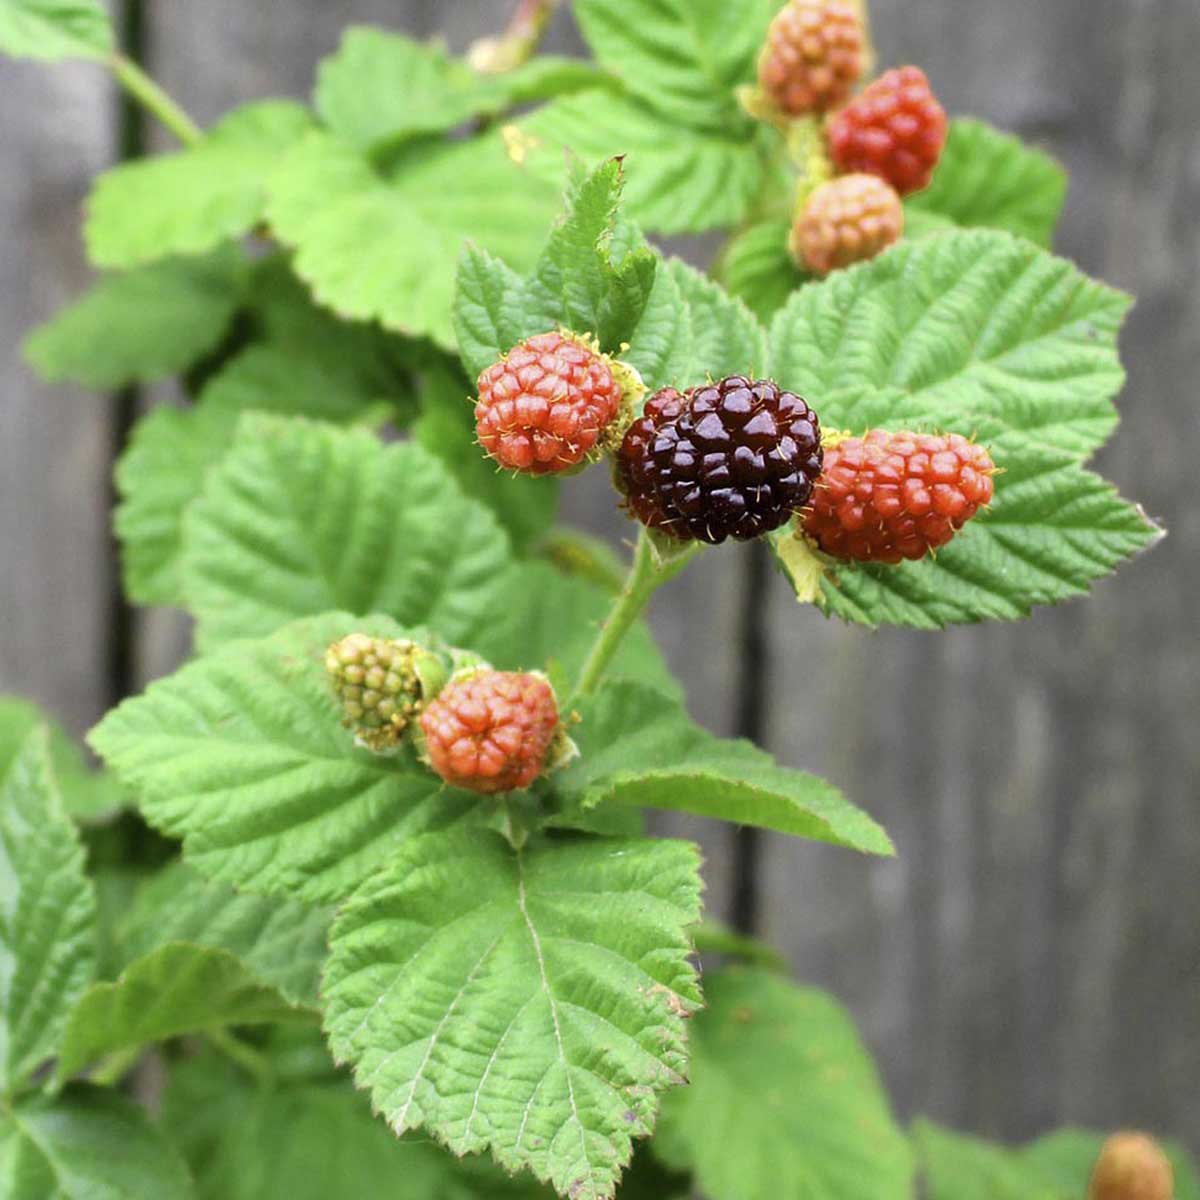 Ripe and not so ripe loganberries on canes of berry plant.